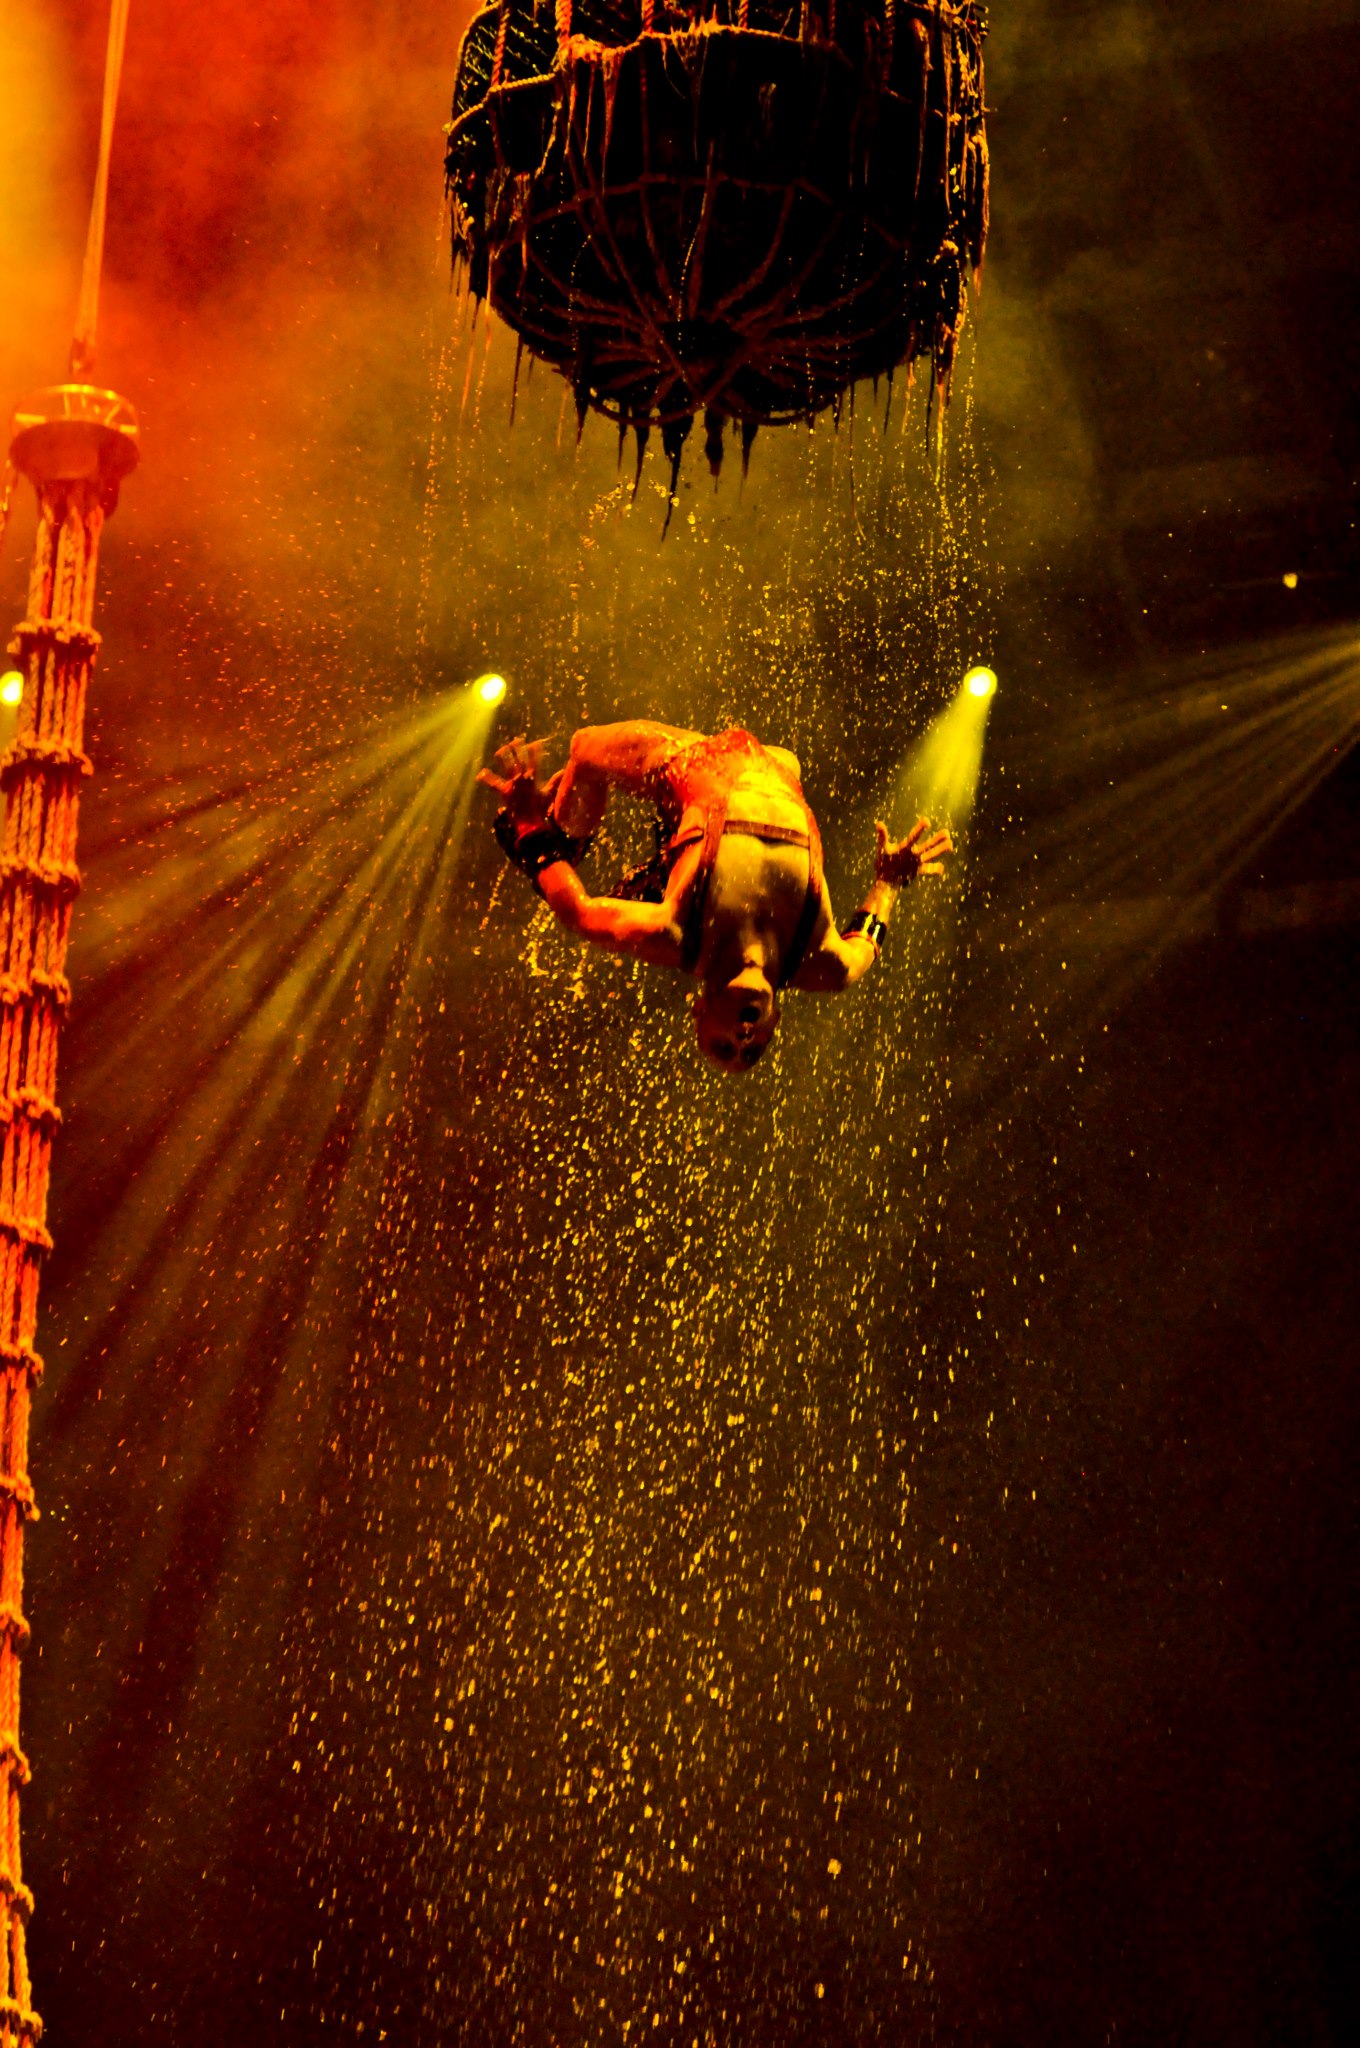 performing 'nets' in the show Le Reve at Wynn Las Vegas